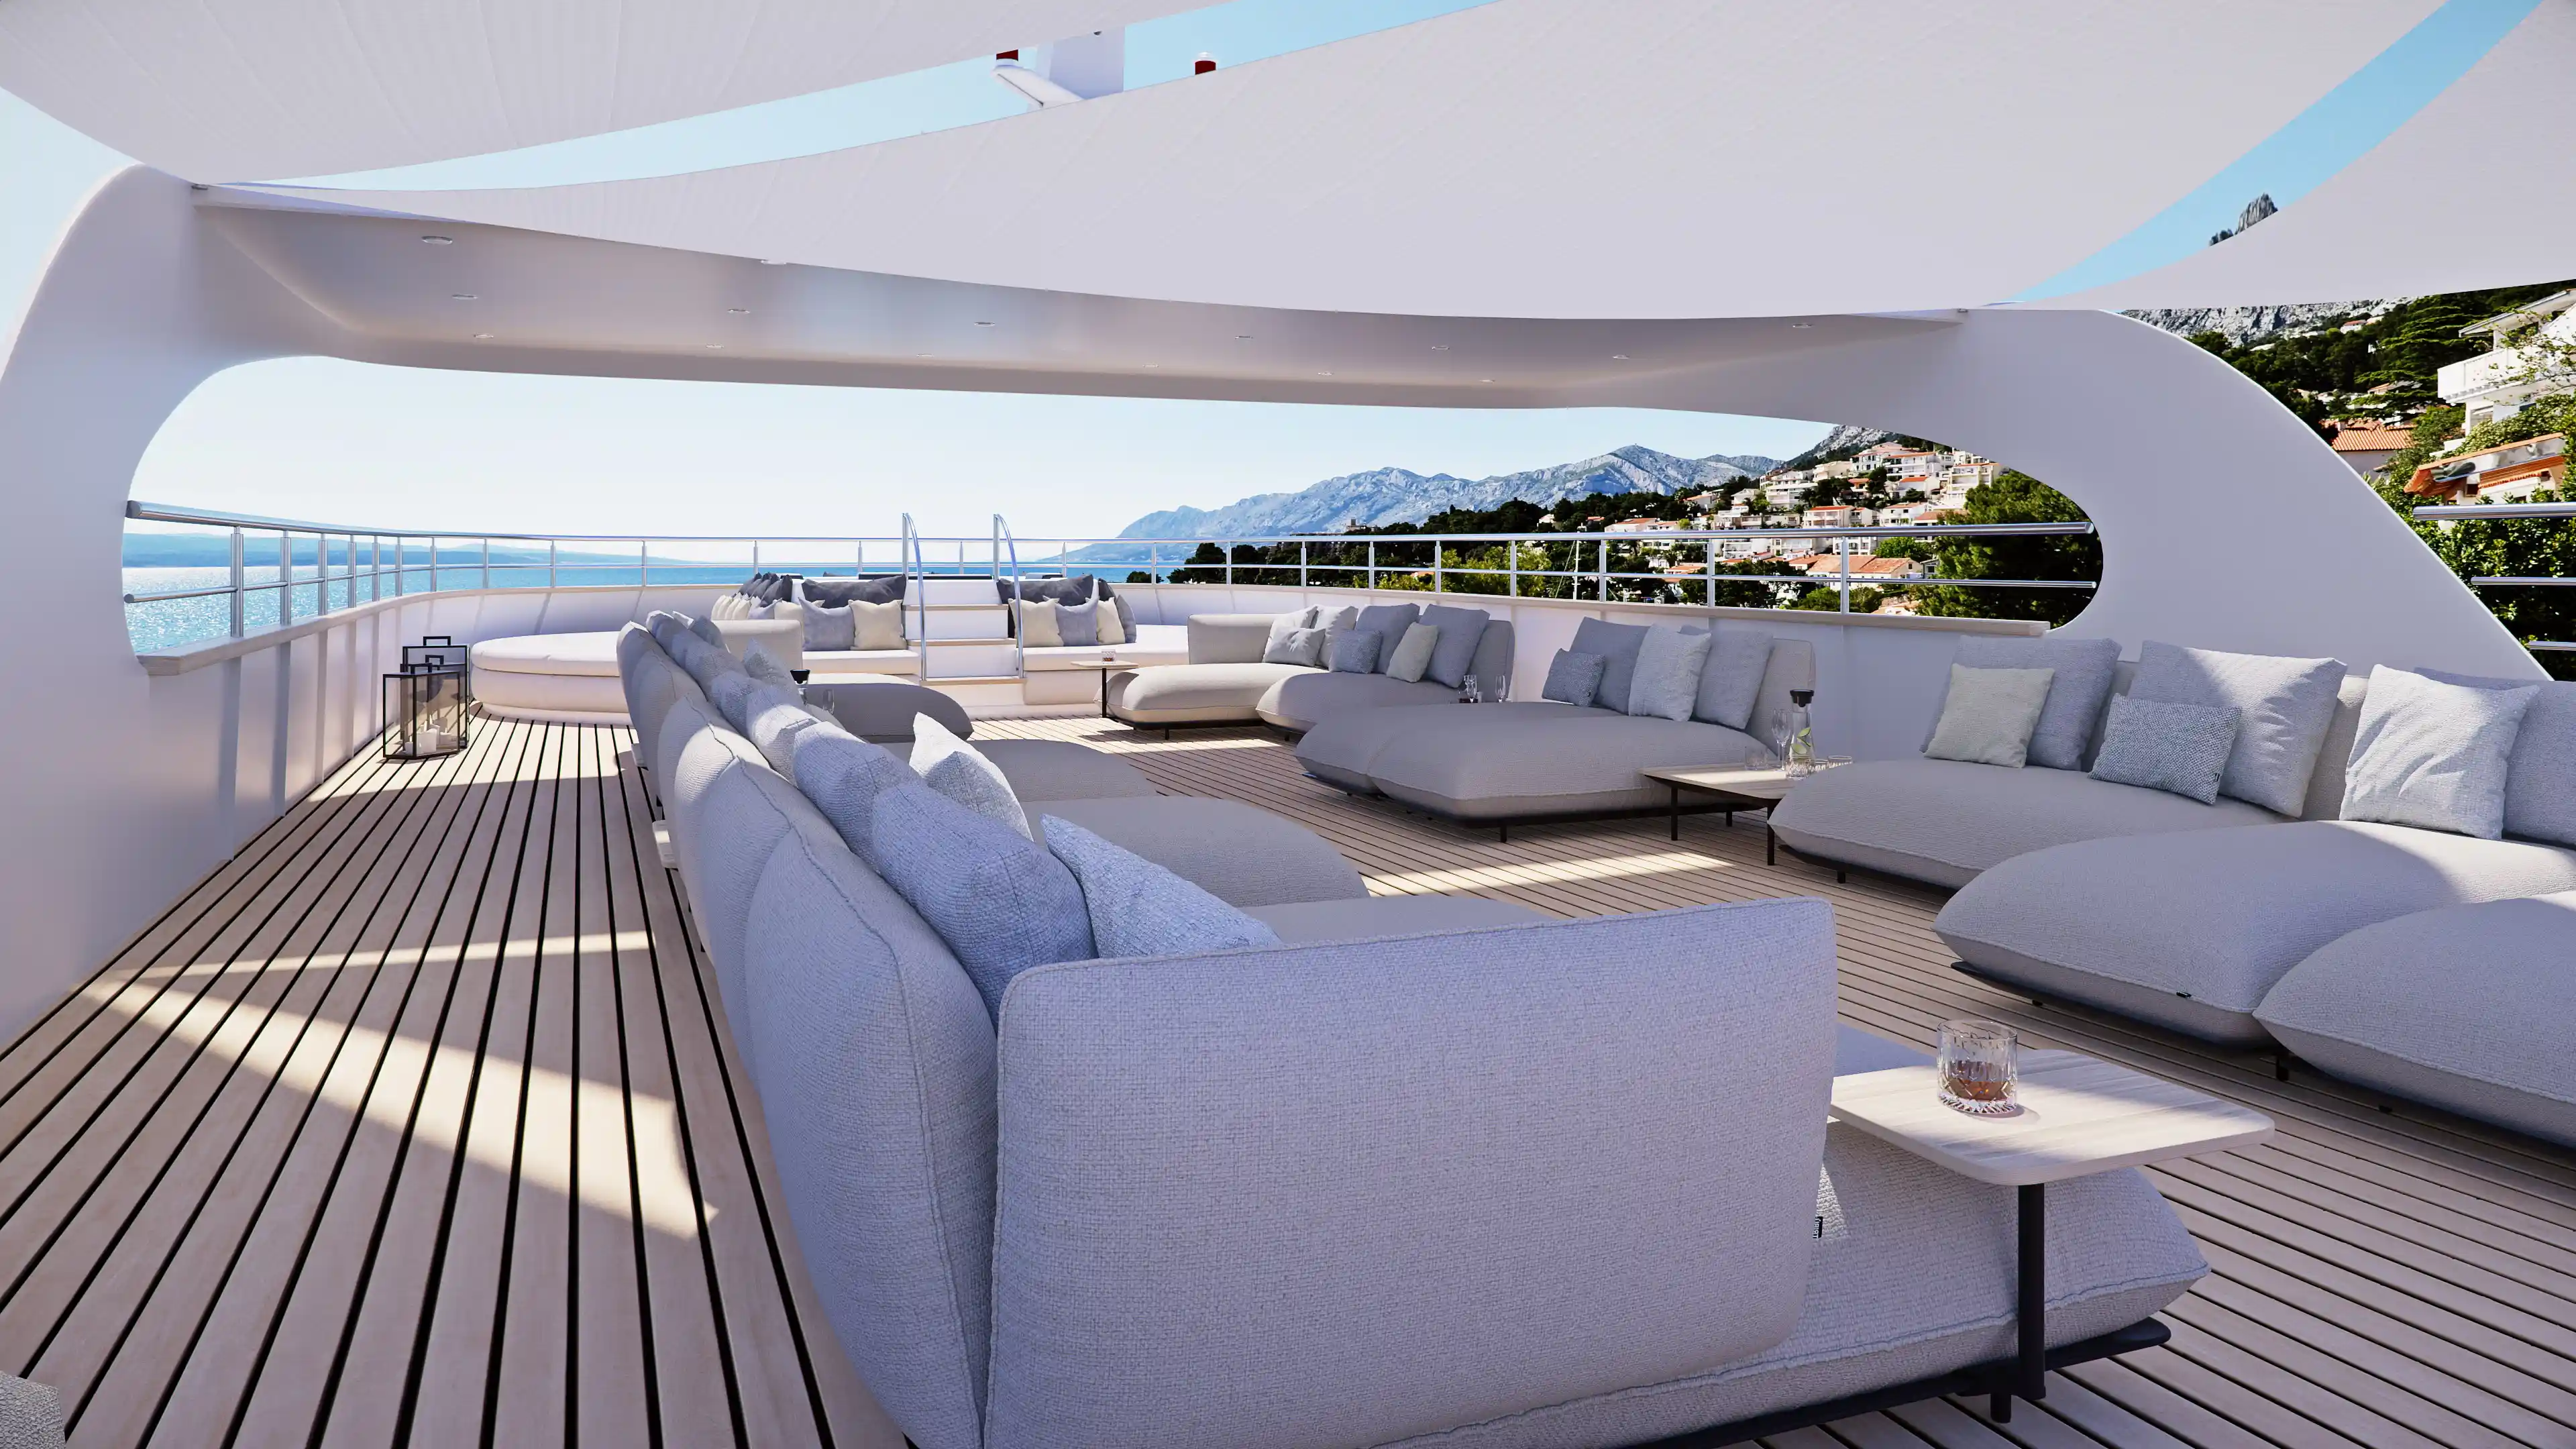 Luxurious terrace with tables and beverages surrounded by the sea, mountains and city